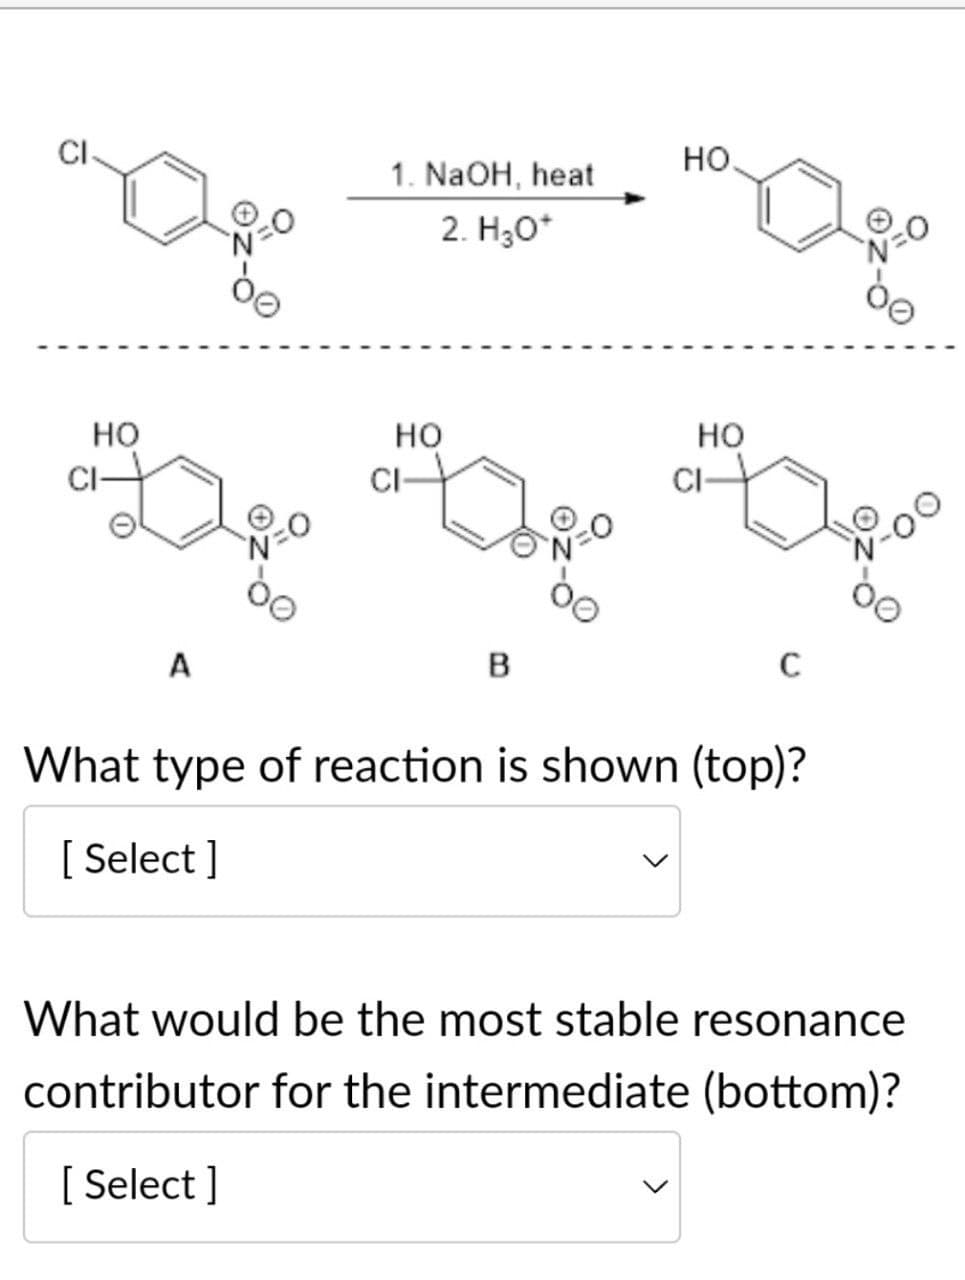 HO
HO
1. NaOH, heat
2. H₂O*
HO
CI
CI-
HO
204
A
B
C
What type of reaction is shown (top)?
[Select]
What would be the most stable resonance
contributor for the intermediate (bottom)?
[Select]